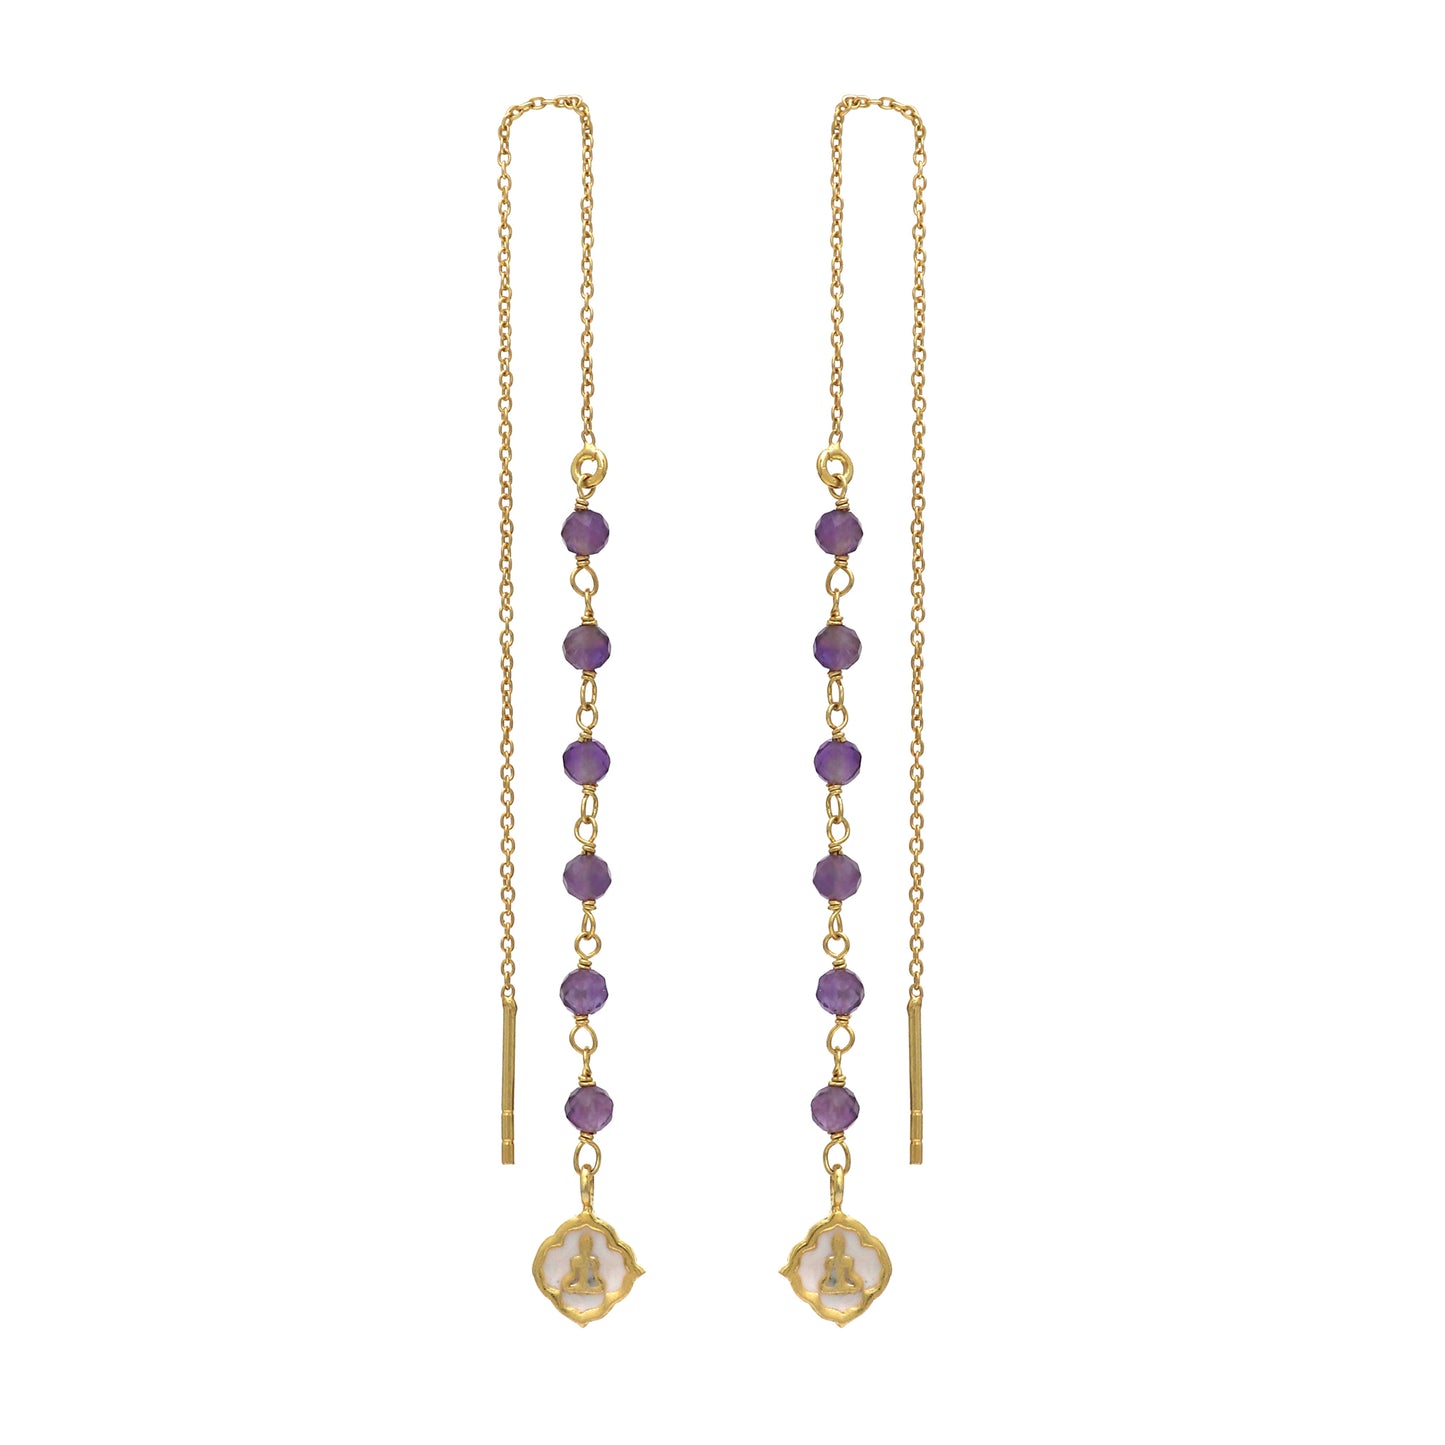 Amethyst and Buddha threader earrings in gold plated 925 sterling silver